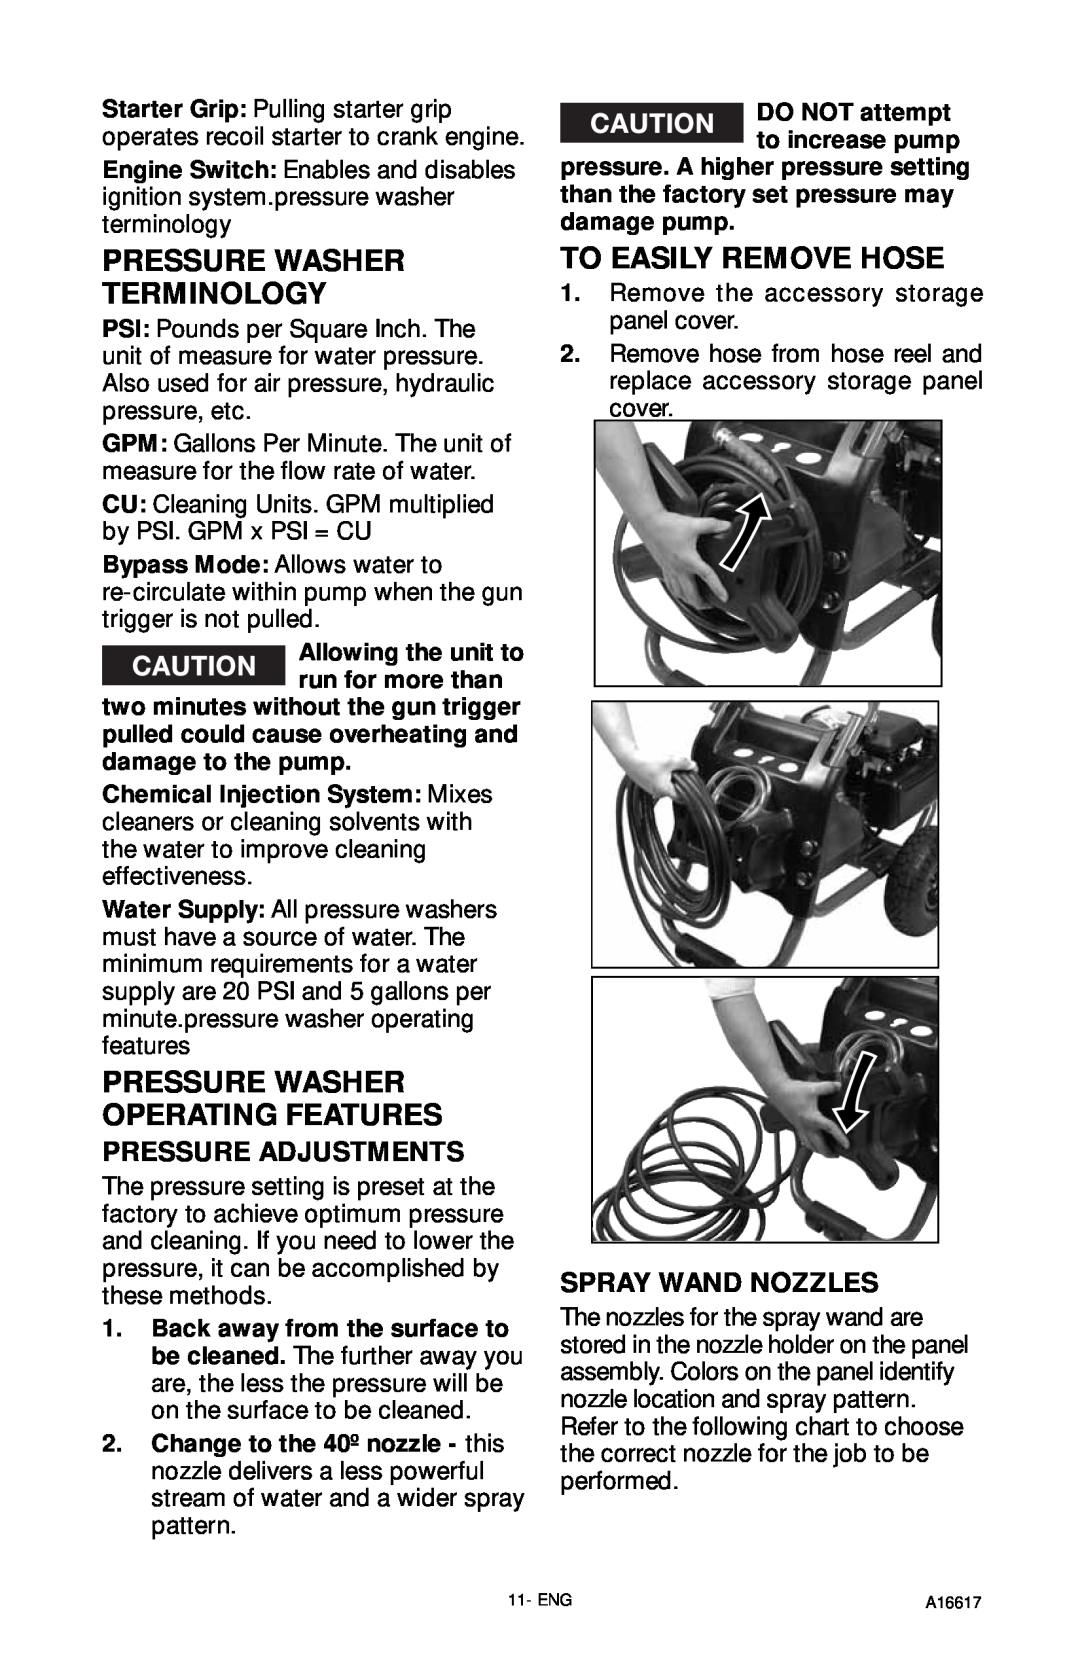 DeVillbiss Air Power Company A16617, XR2625 Pressure Washer Terminology, To Easily Remove Hose, Pressure Adjustments 